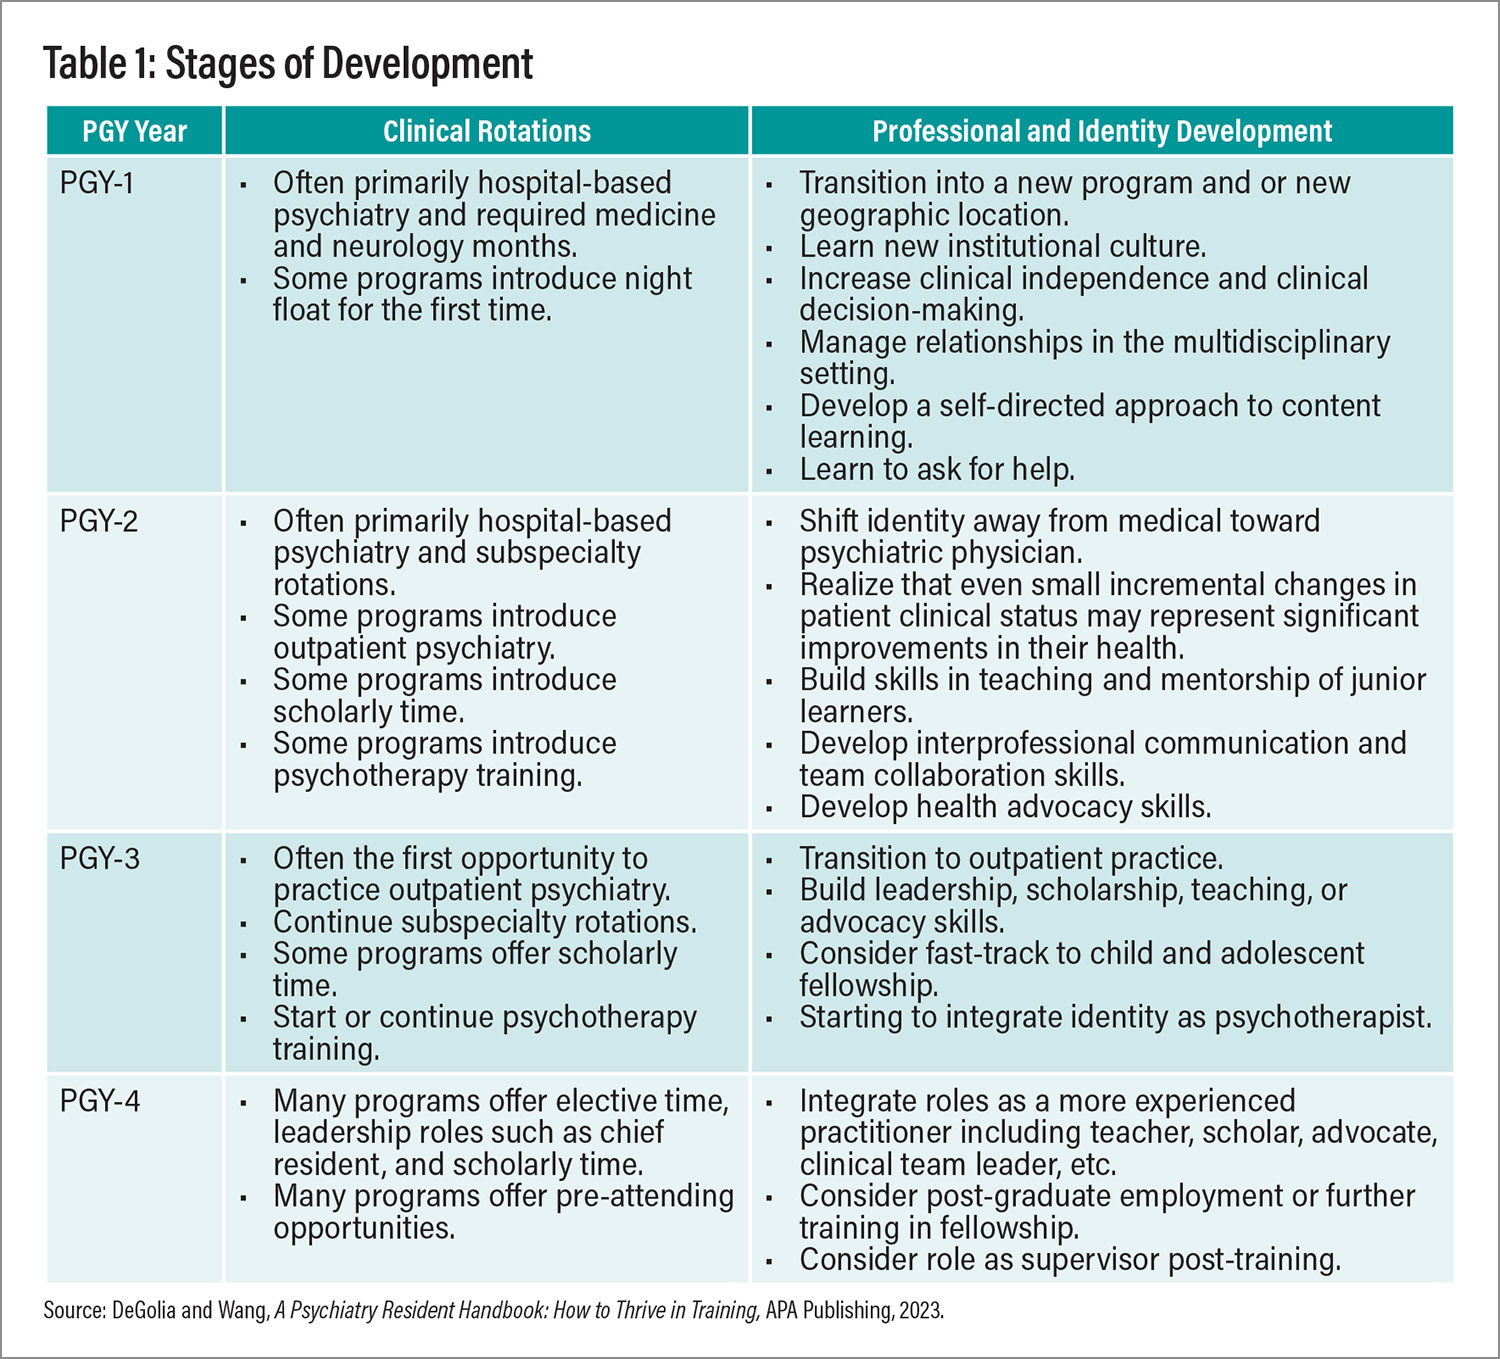 Table 1: Stages of Development